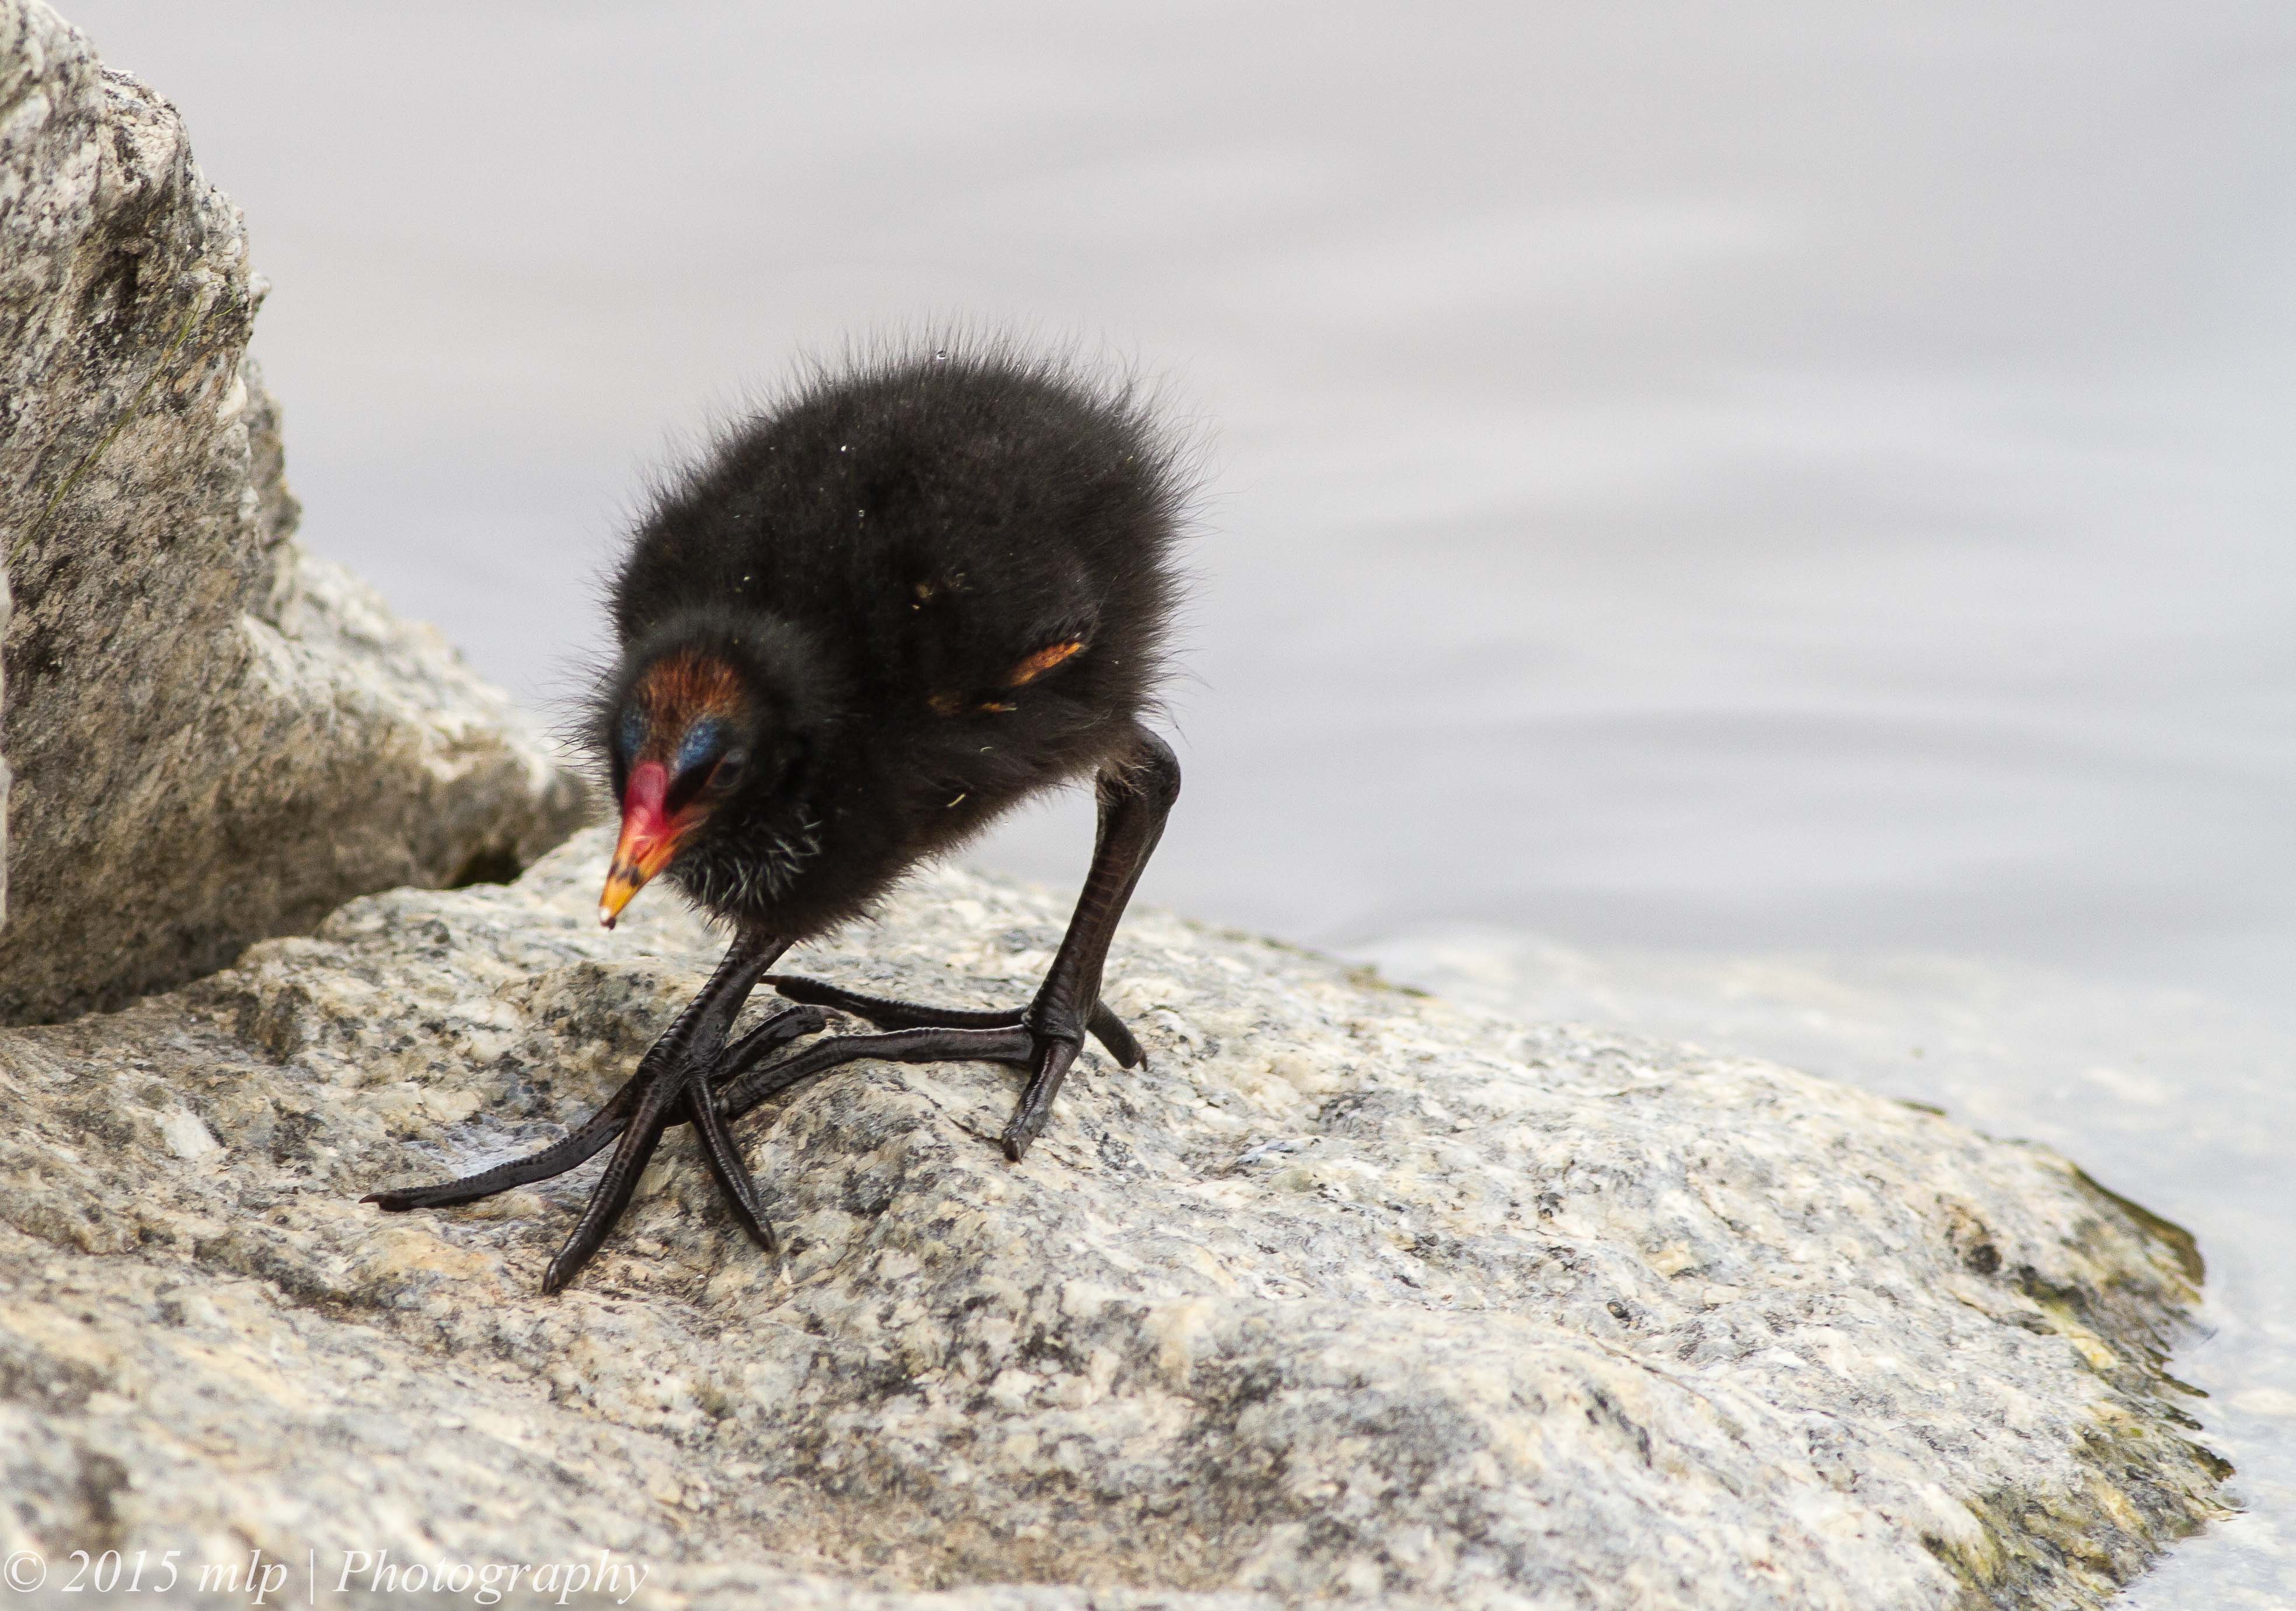 the chick of the dusky moorhen has very large feet, a grey brow of feathers and looks bald. 